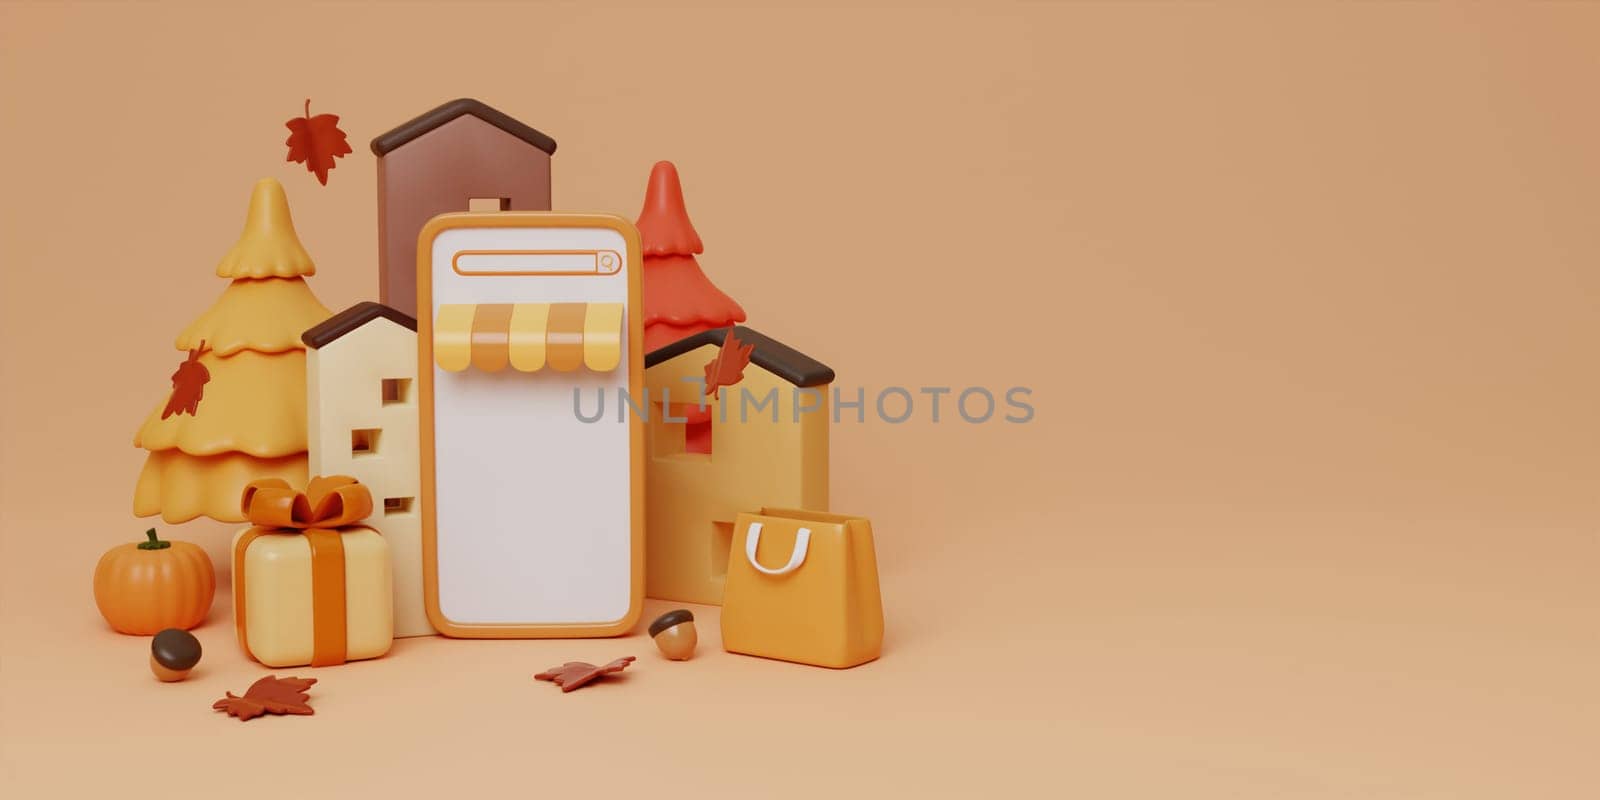 Hello Autumn with phone, leaves, pumpkins, walnut, shopping bag, gift box background. 3d Fall leaves for the design of Fall banners, posters, advertisements, cards, sales. 3d render illustration..